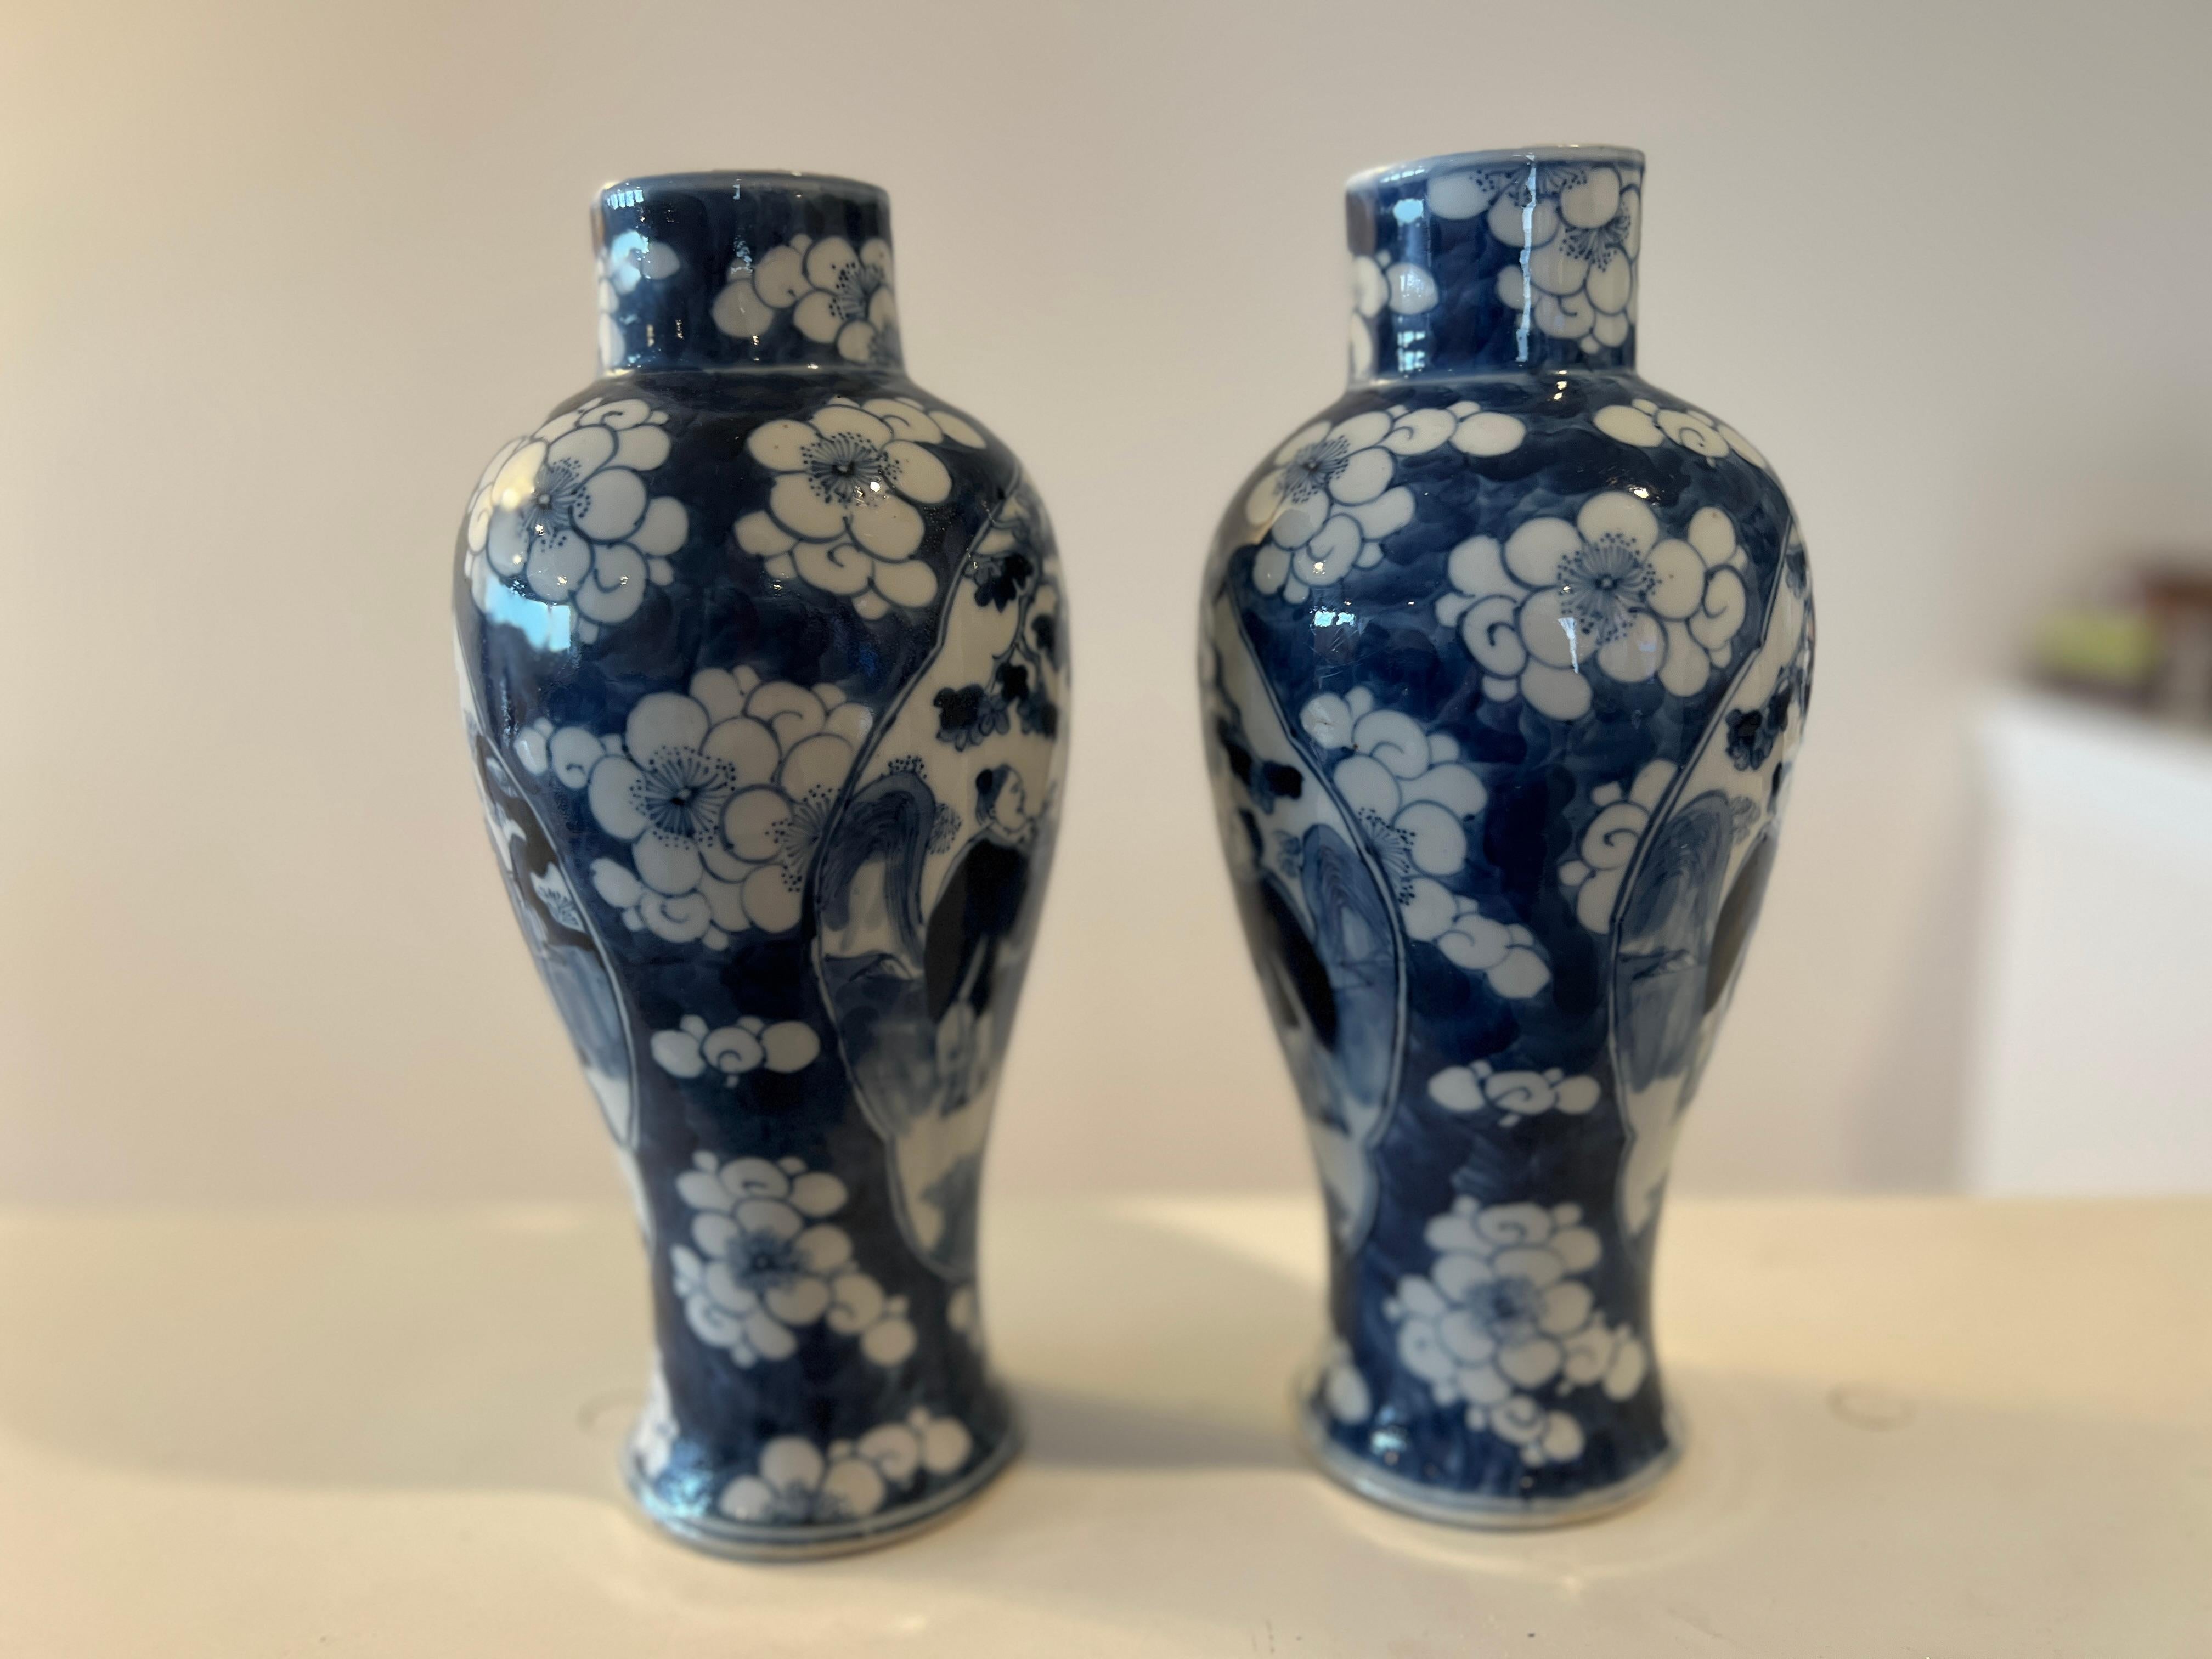 Chinese, Hongxian period circa 1915. 

A pair of Chinese export porcelain vases in a blue and white floral motif surrounding two figural emperor windows. Marked with wax seal and Hongxian mark to underside. 